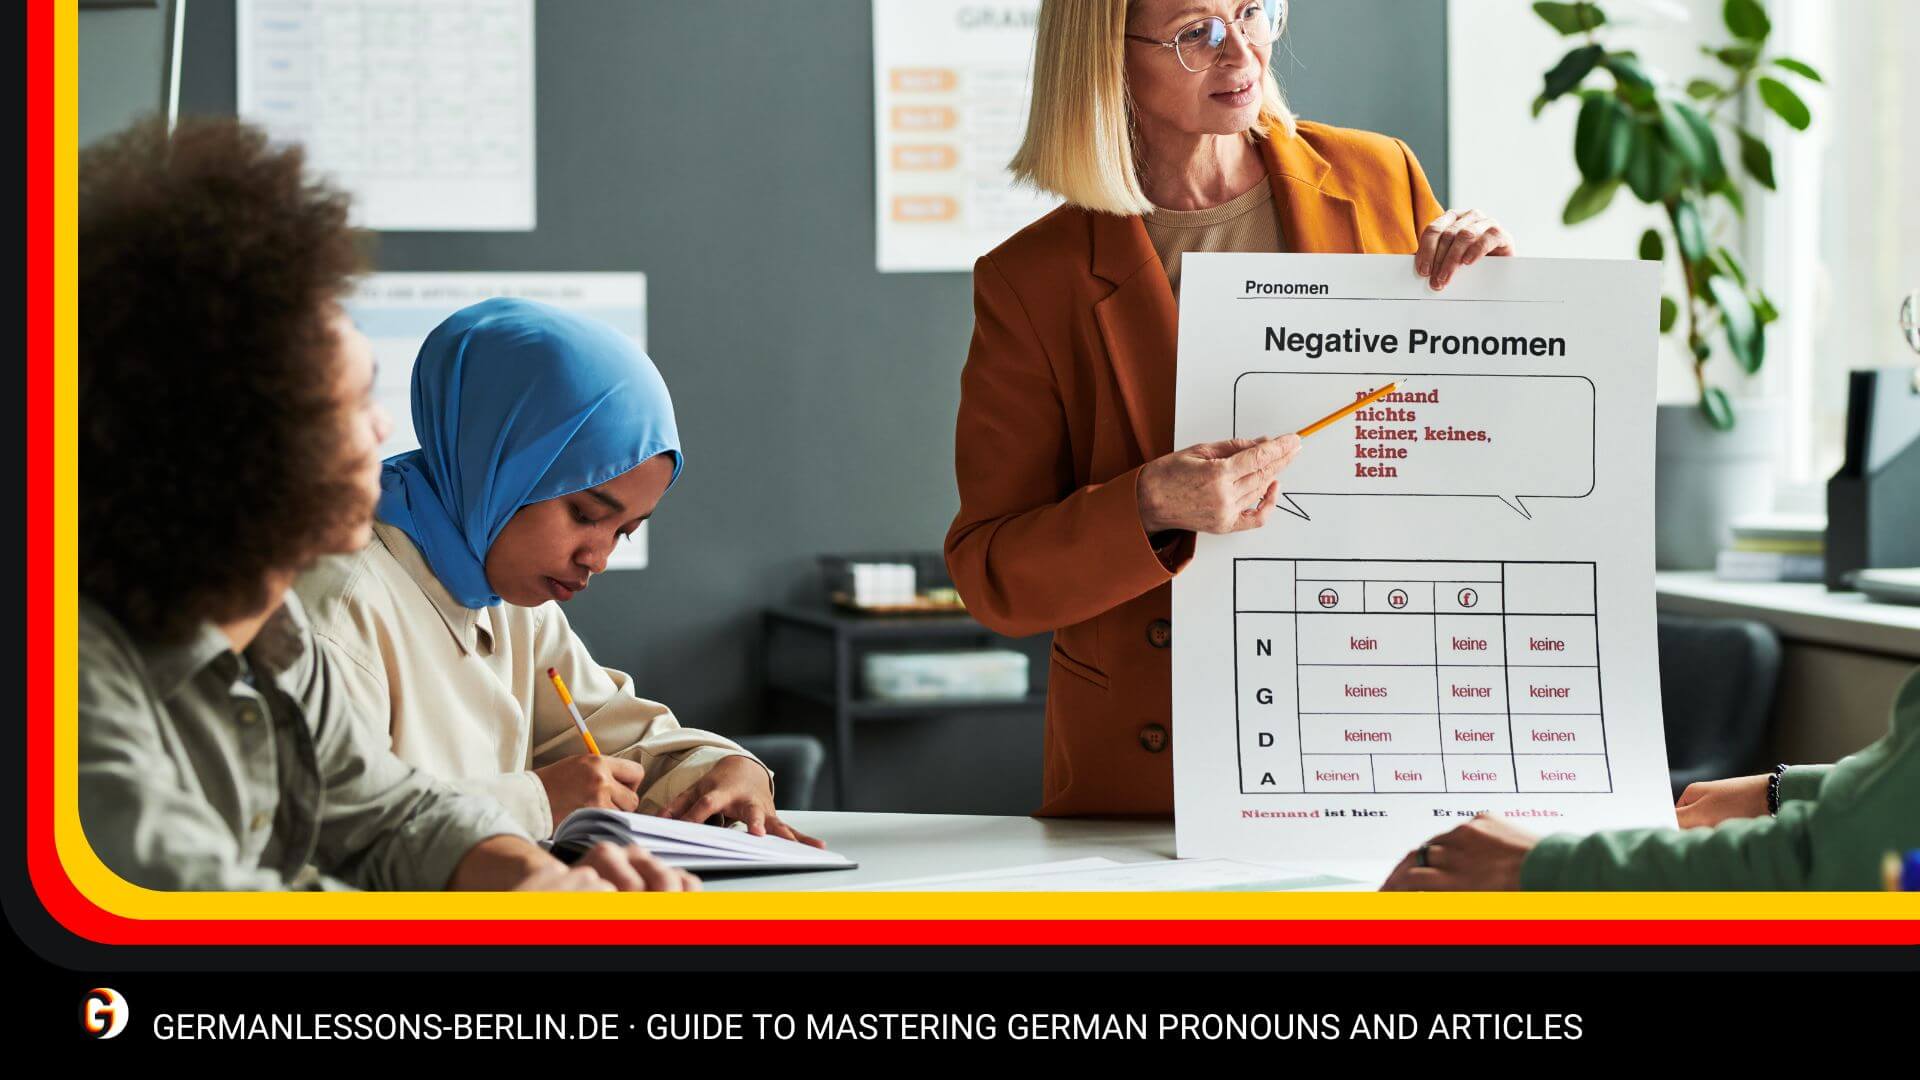 Guide to Mastering German Pronouns and Articles